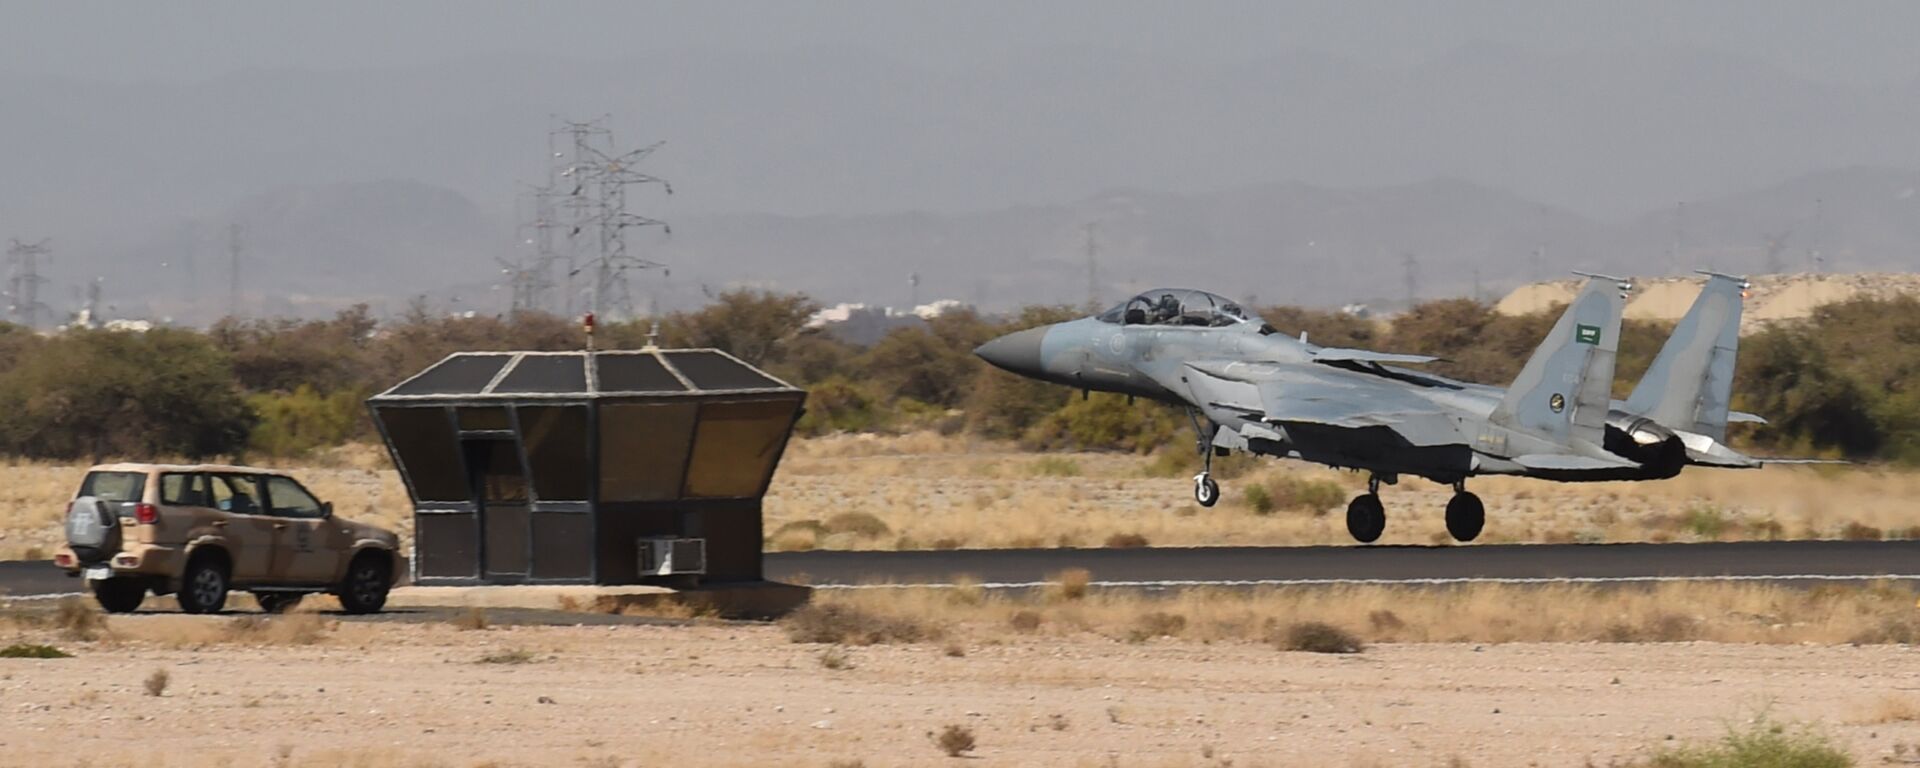 A picture taken on November 16, 2015 shows a Saudi F-15 fighter jet landing at the Khamis Mushayt military airbase, some 880 km from the capital Riyadh - Sputnik International, 1920, 22.03.2021